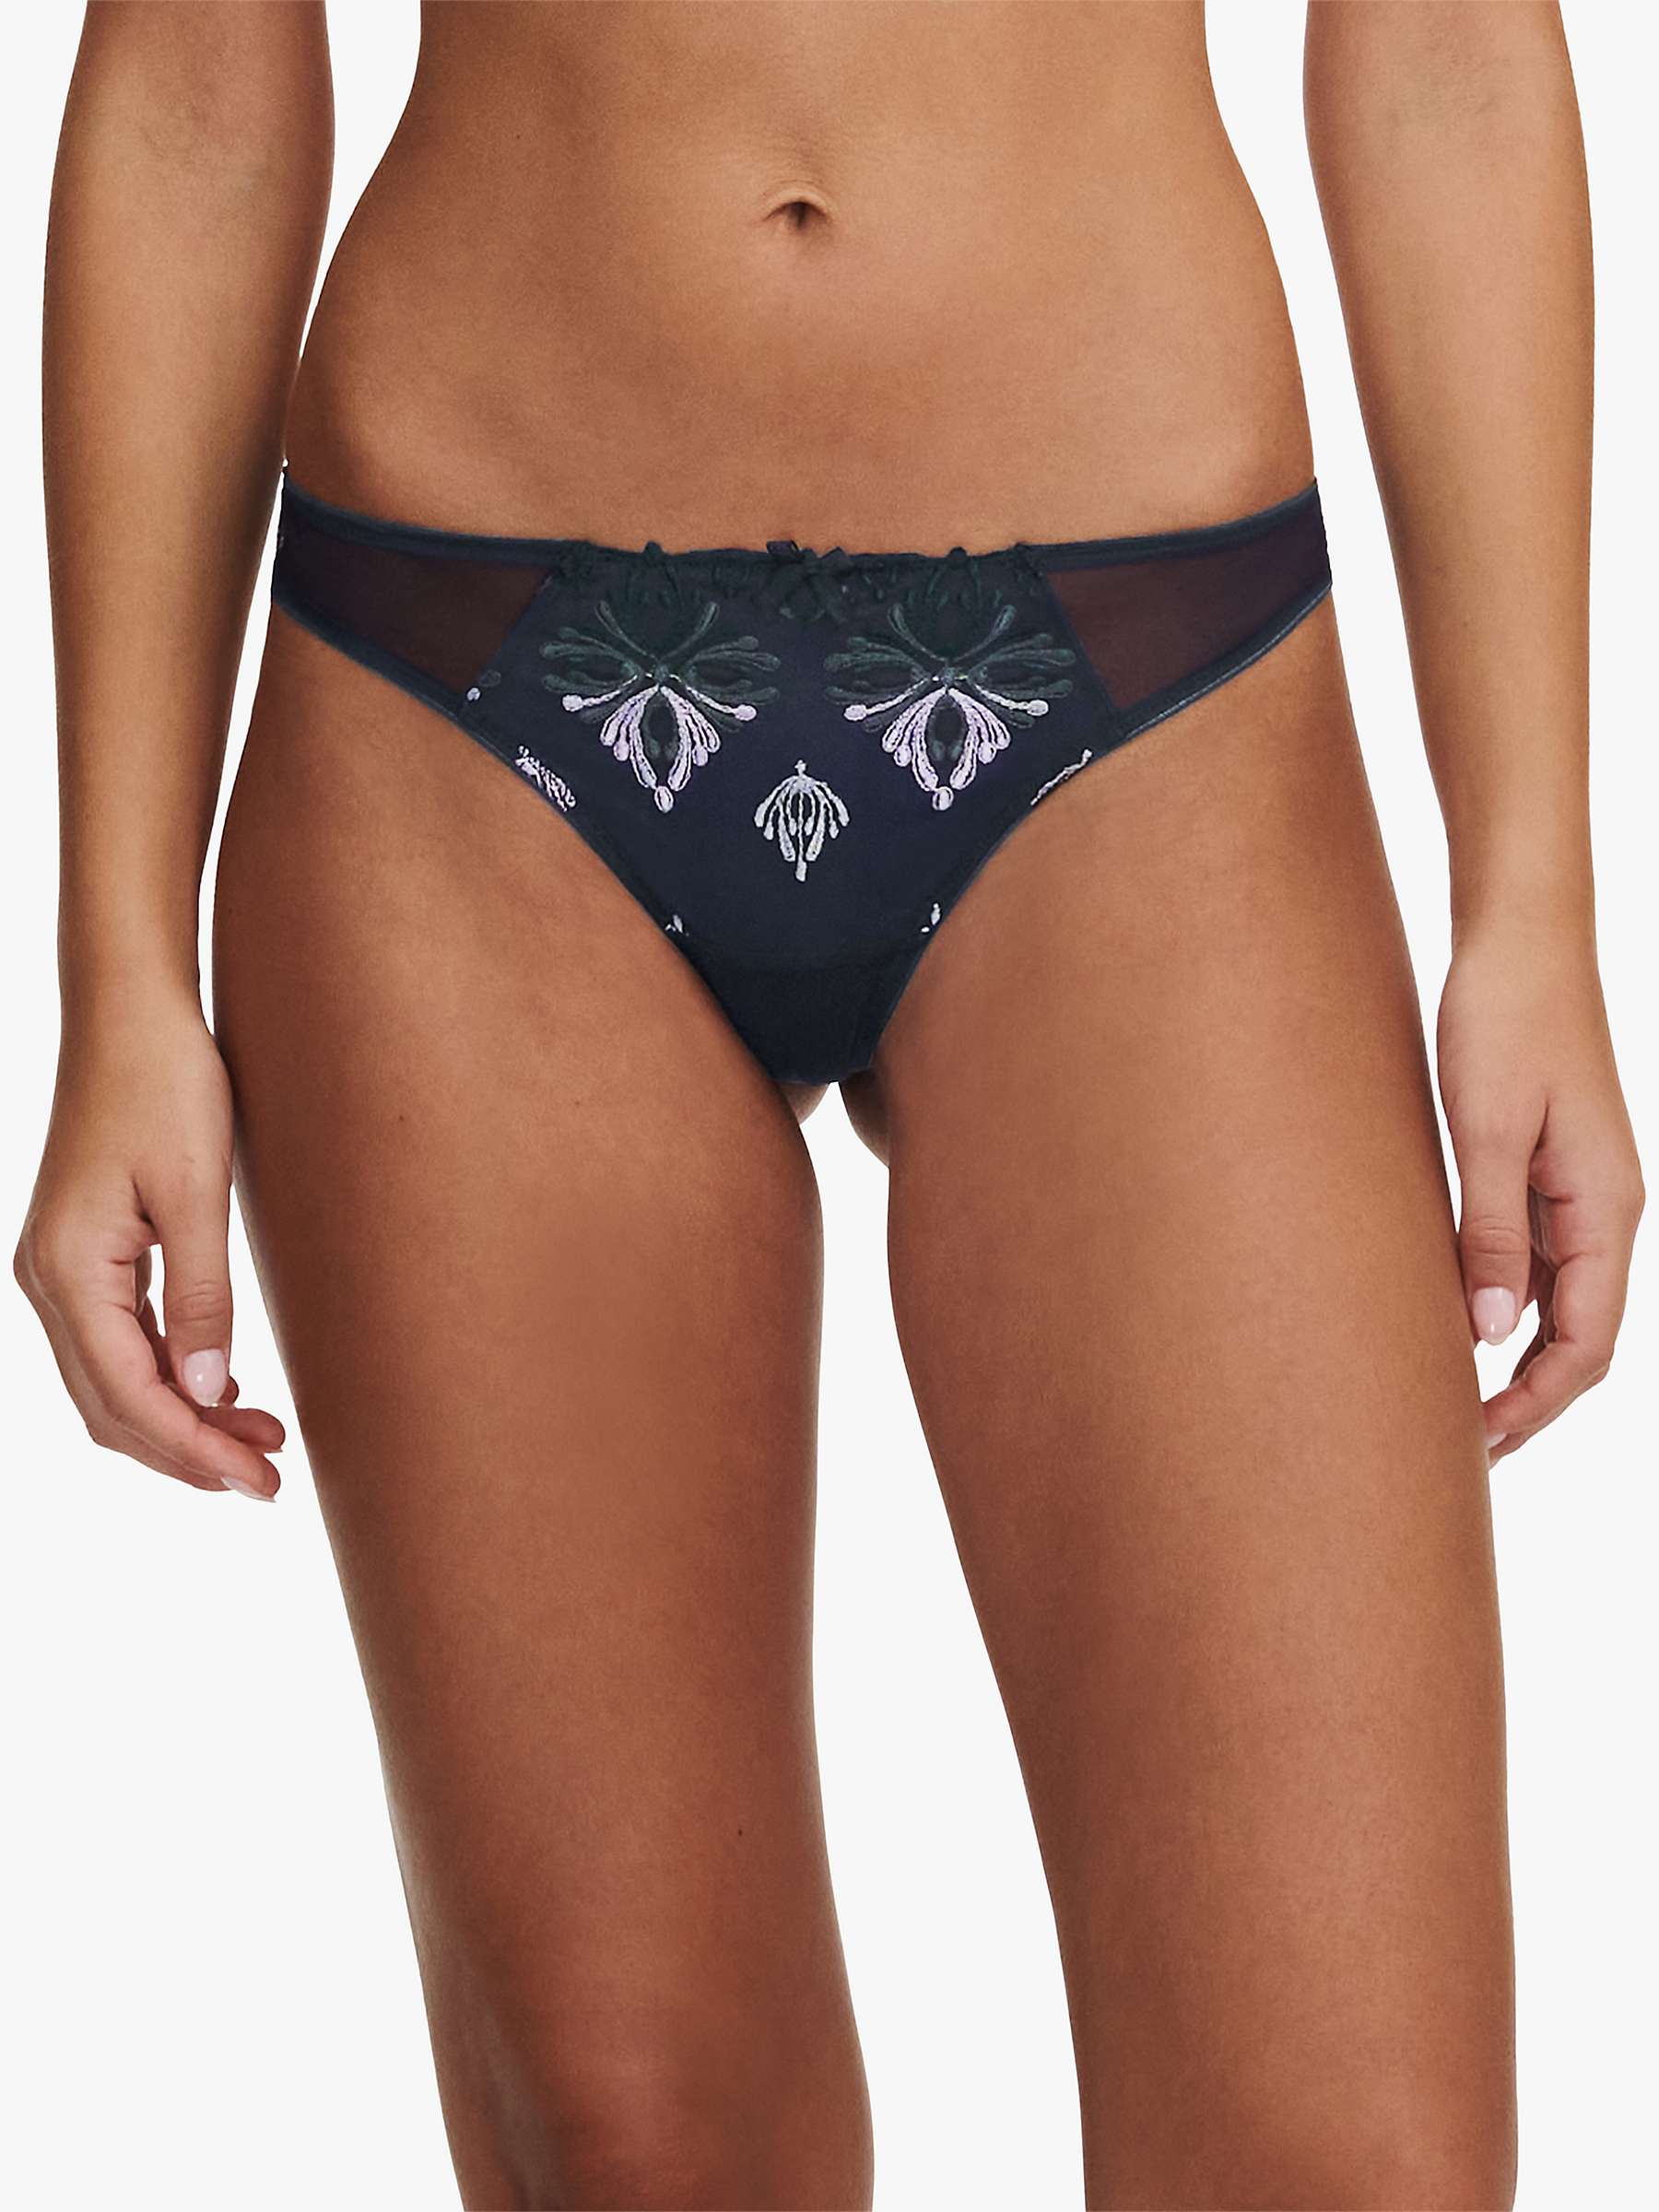 Buy Chantelle Champs Elysees Tanga Knickers Online at johnlewis.com